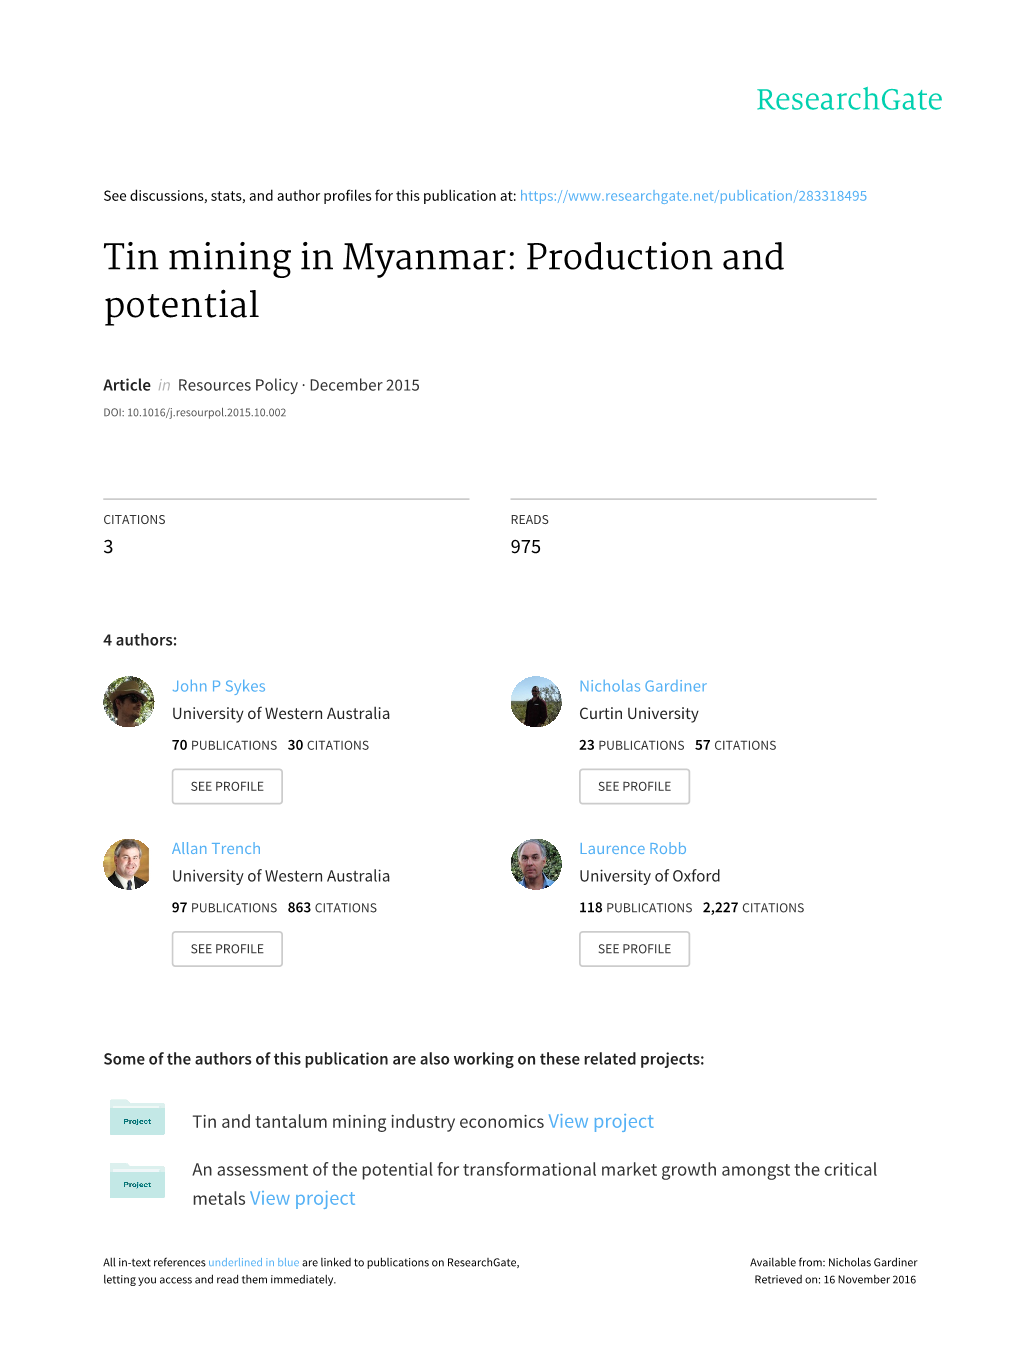 Tin Mining in Myanmar: Production and Potential